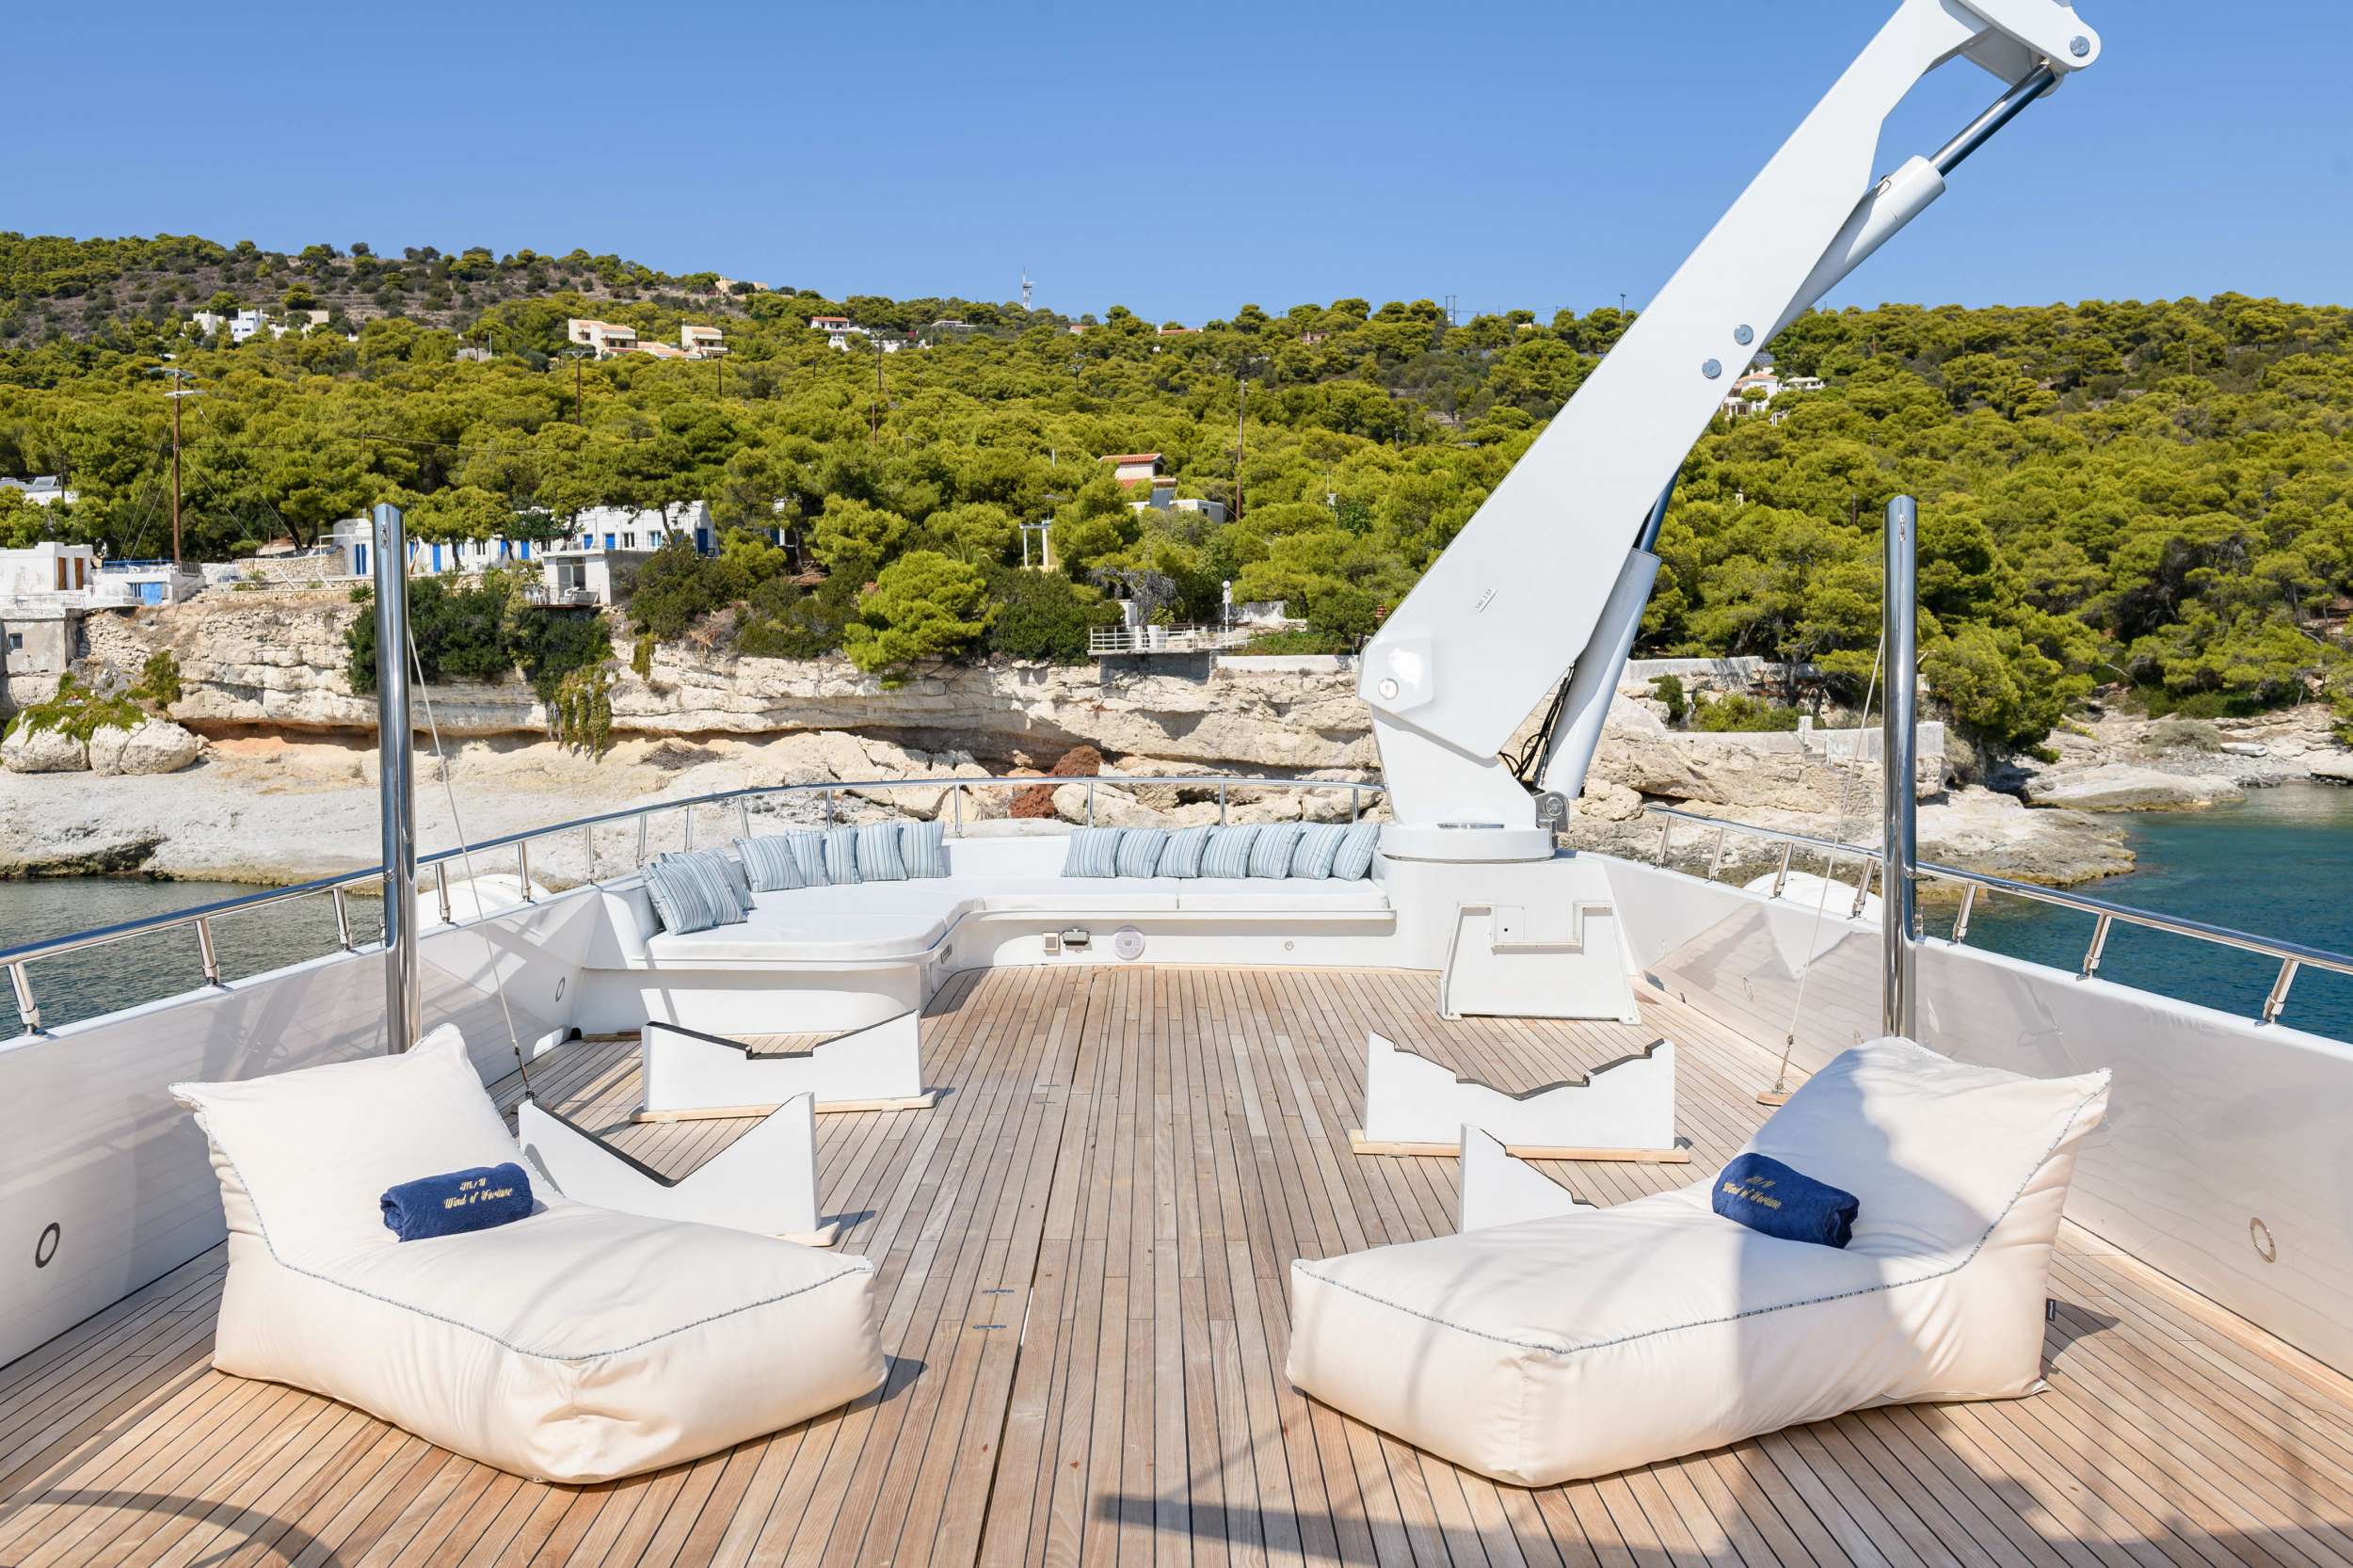 WIND OF FORTUNE Yacht Charter - Sun Deck